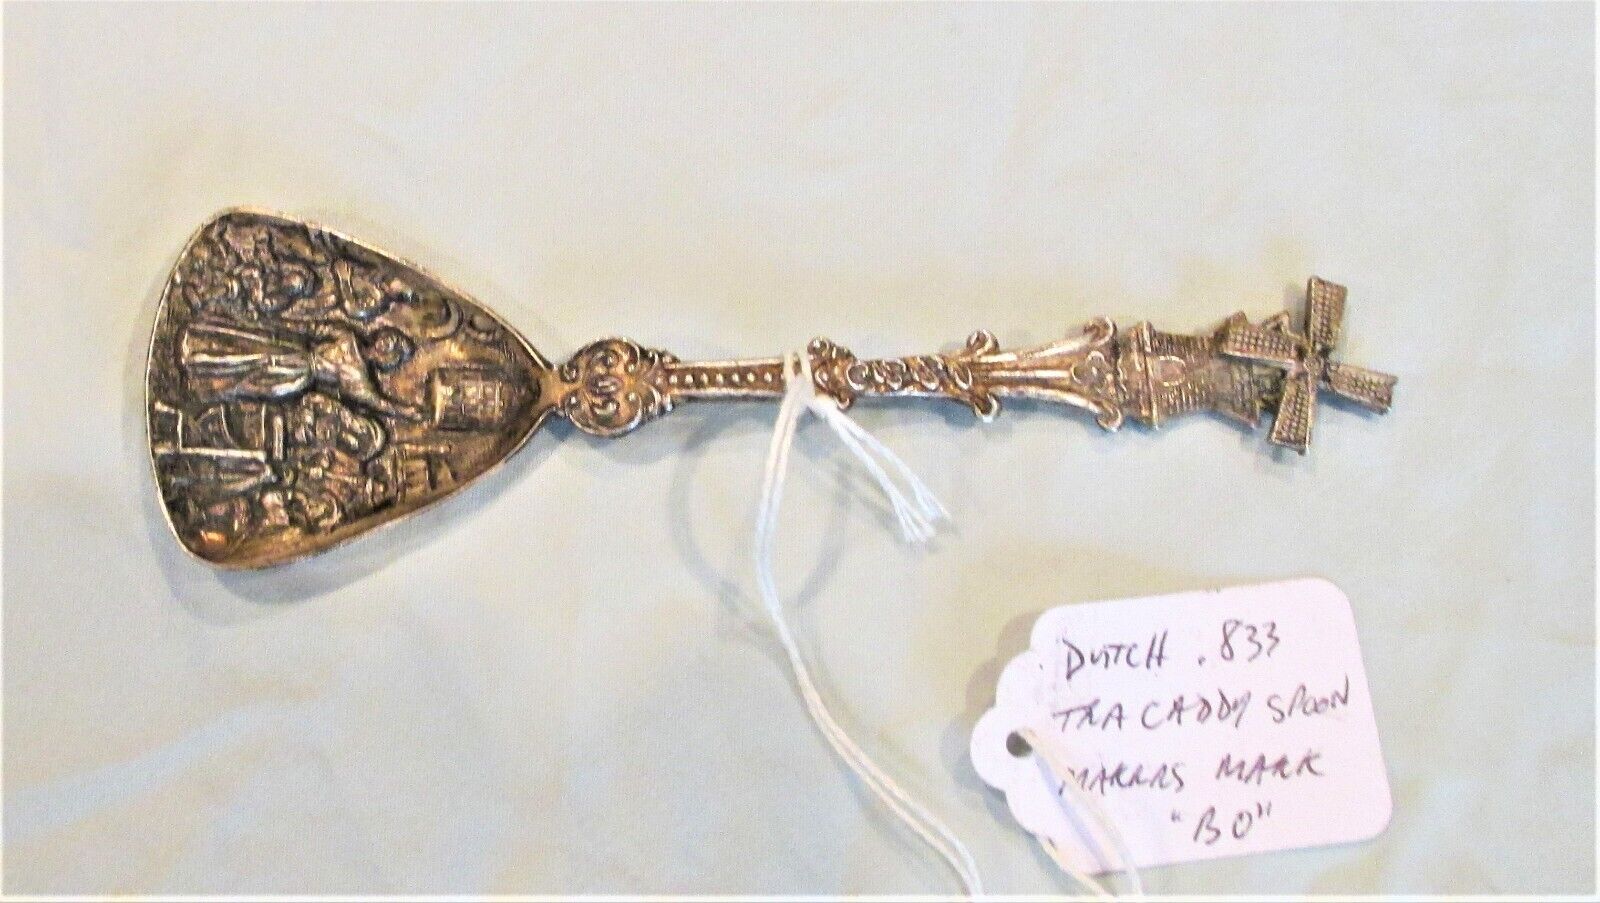 Dutch Repousse Tea Caddy Spoon, marked